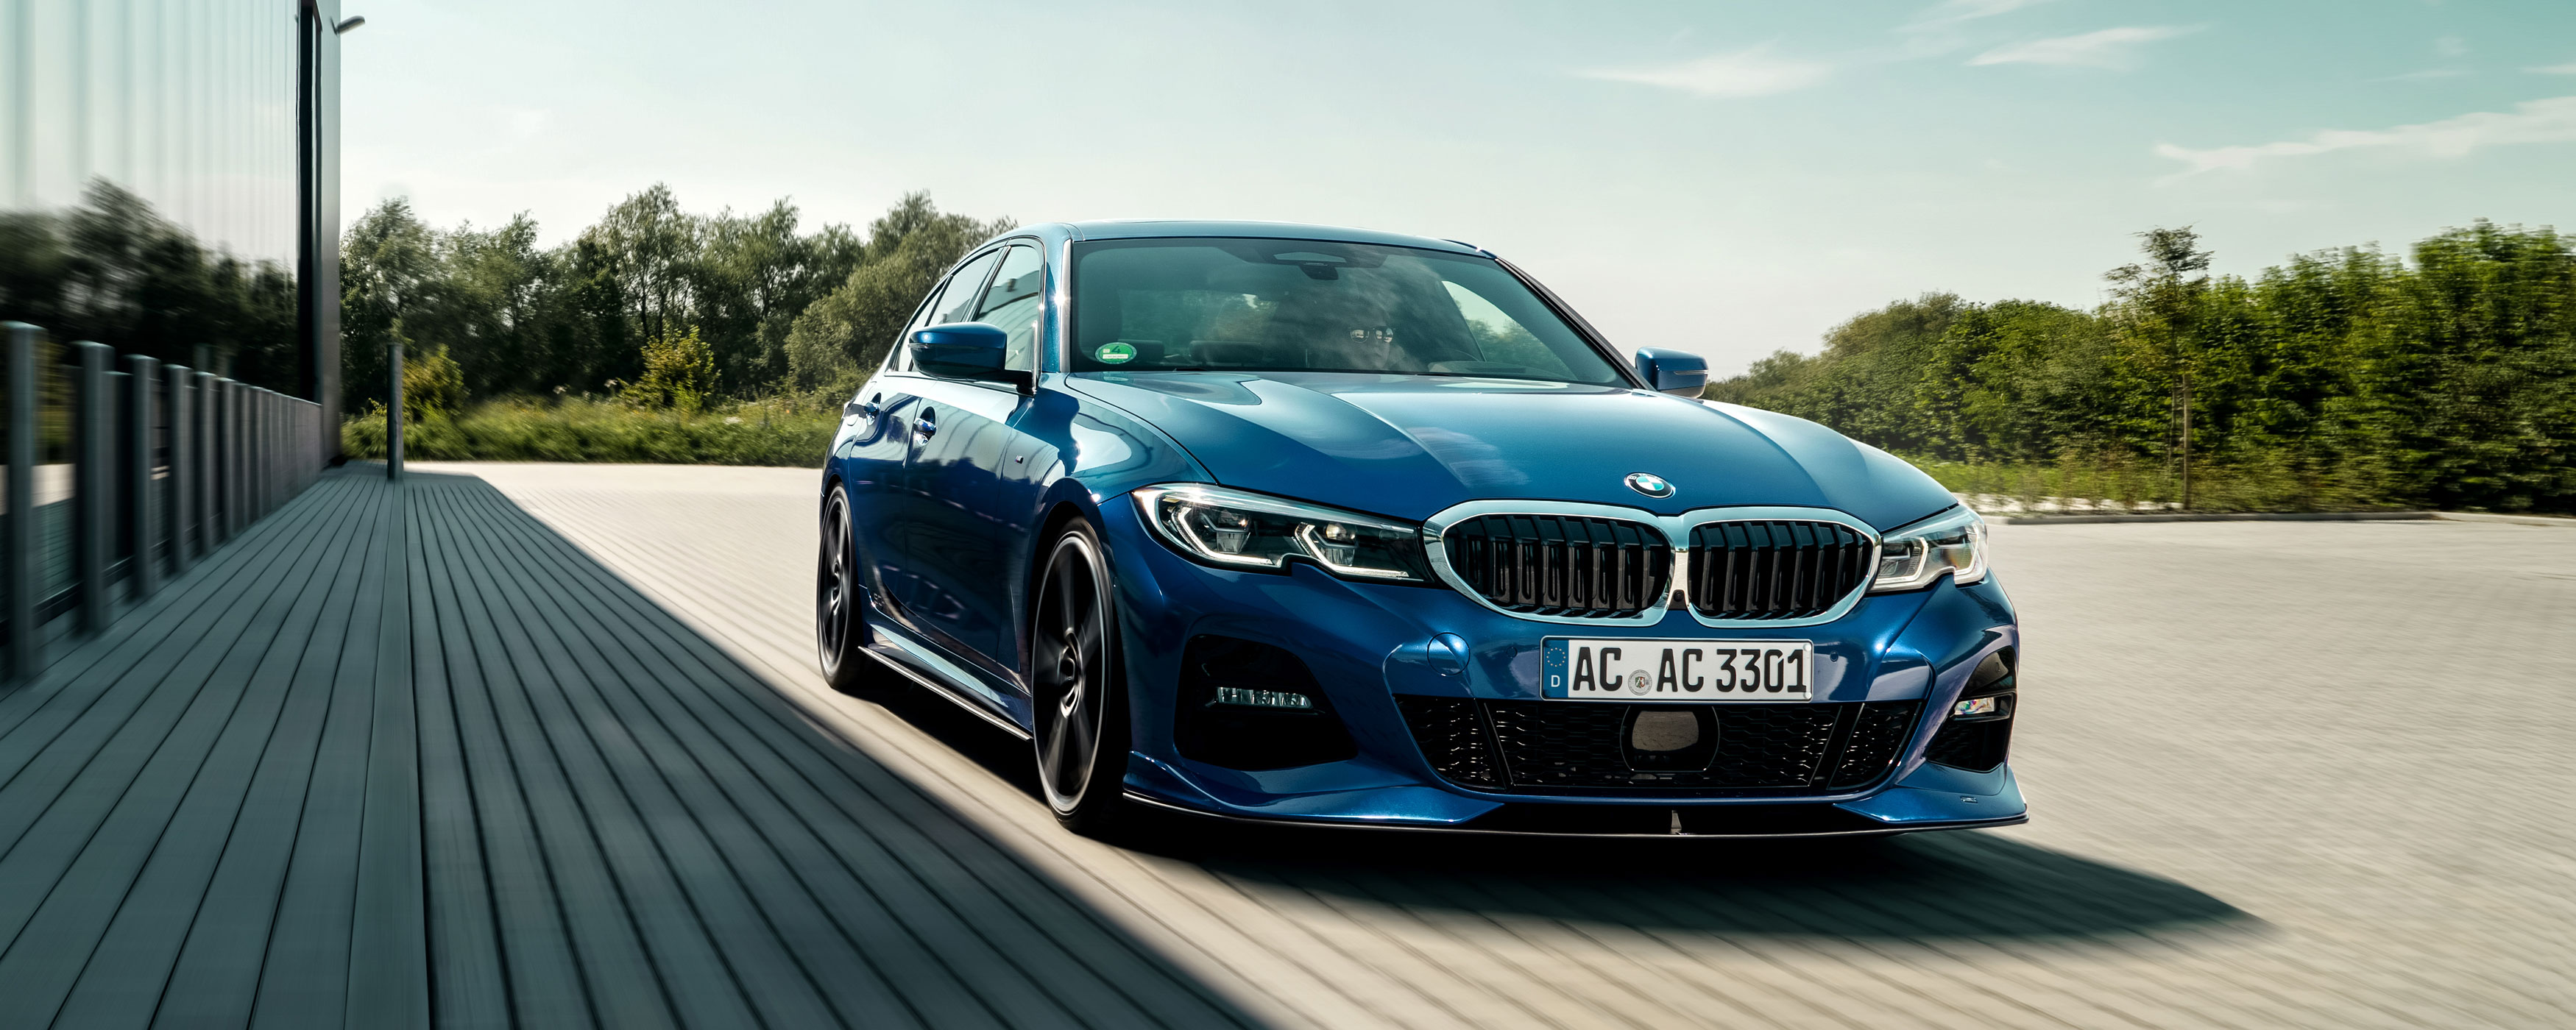 AC Schnitzer Gives G20 3-Series BMW M-Like Looks, Sports